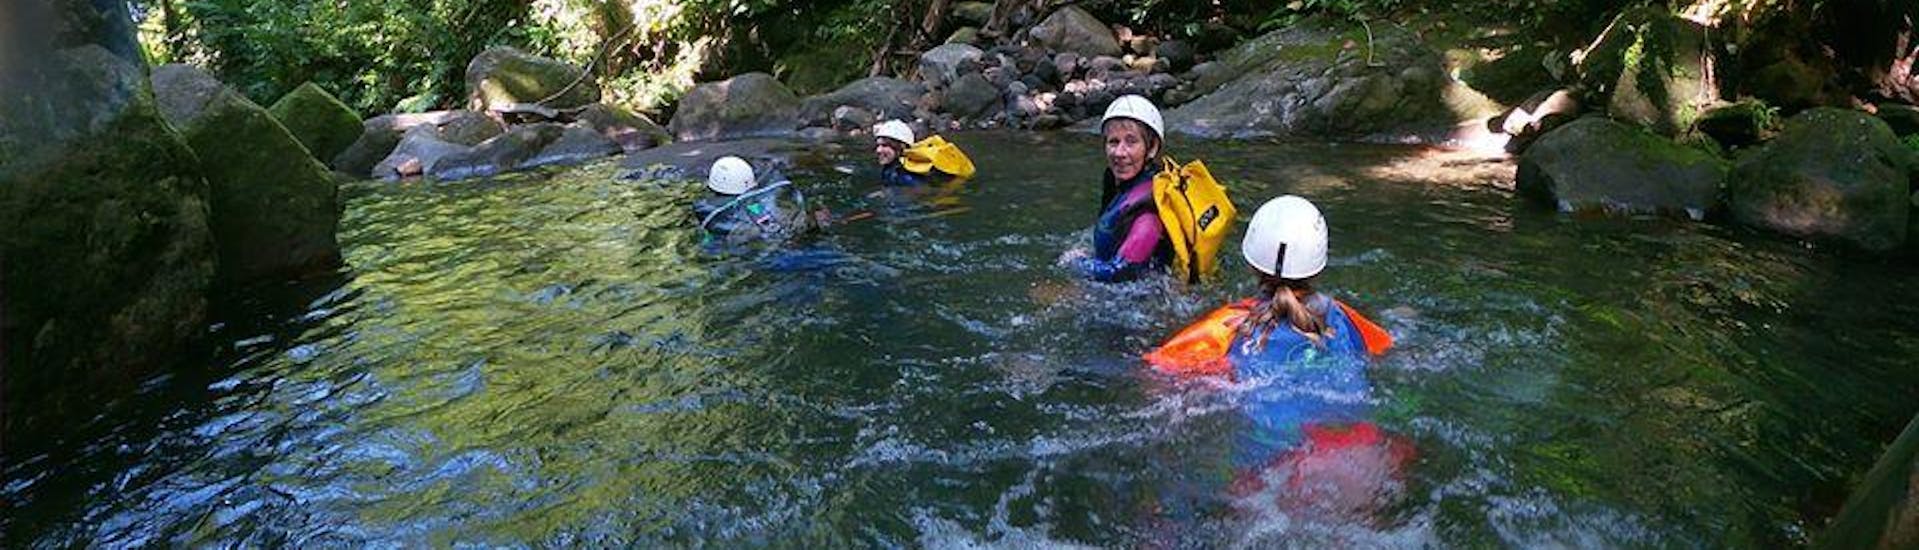 Gevorderde Canyoning in Saint-Claude.